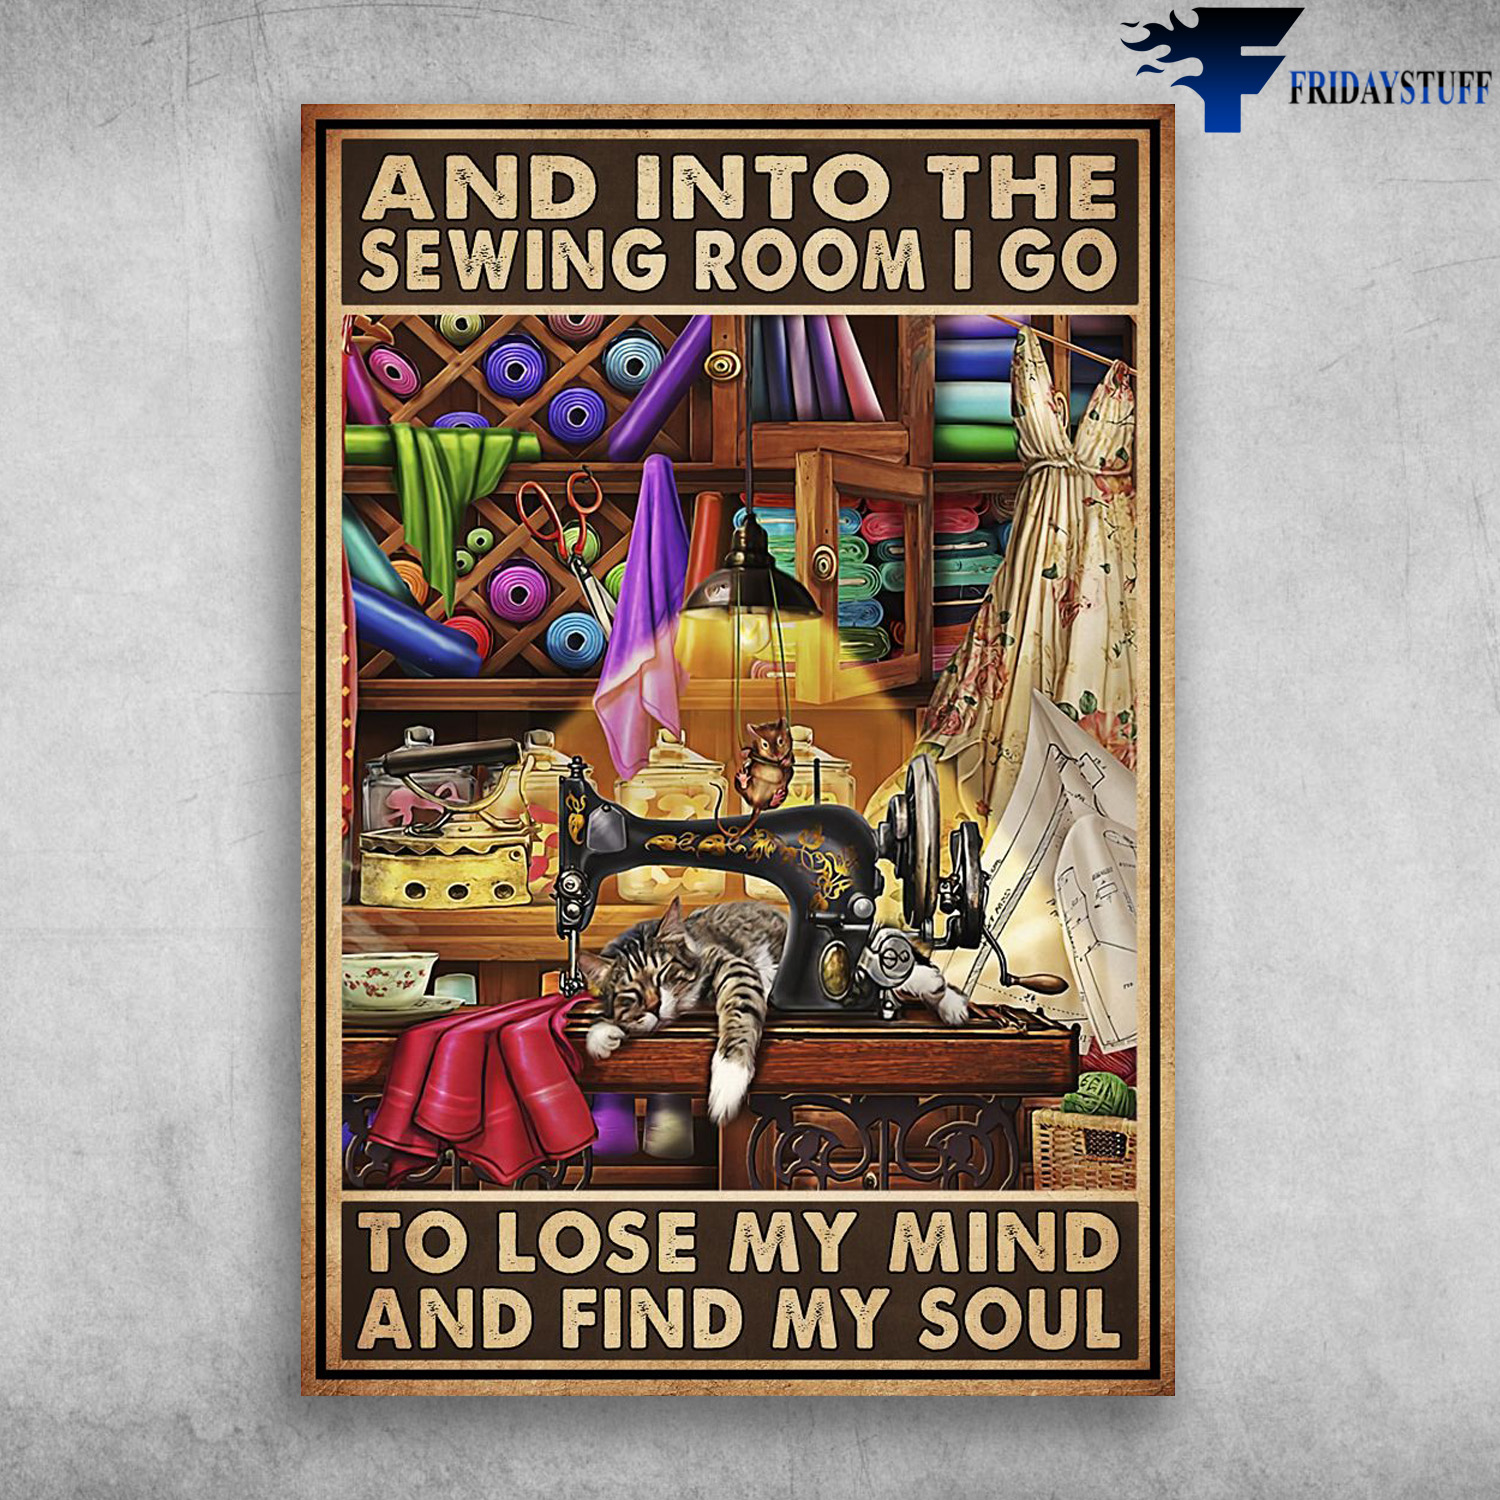 Sleeping Cat In Sewing Room - And Ito The Sewing Room, I Go To Lose My Mind, And Find My Soul